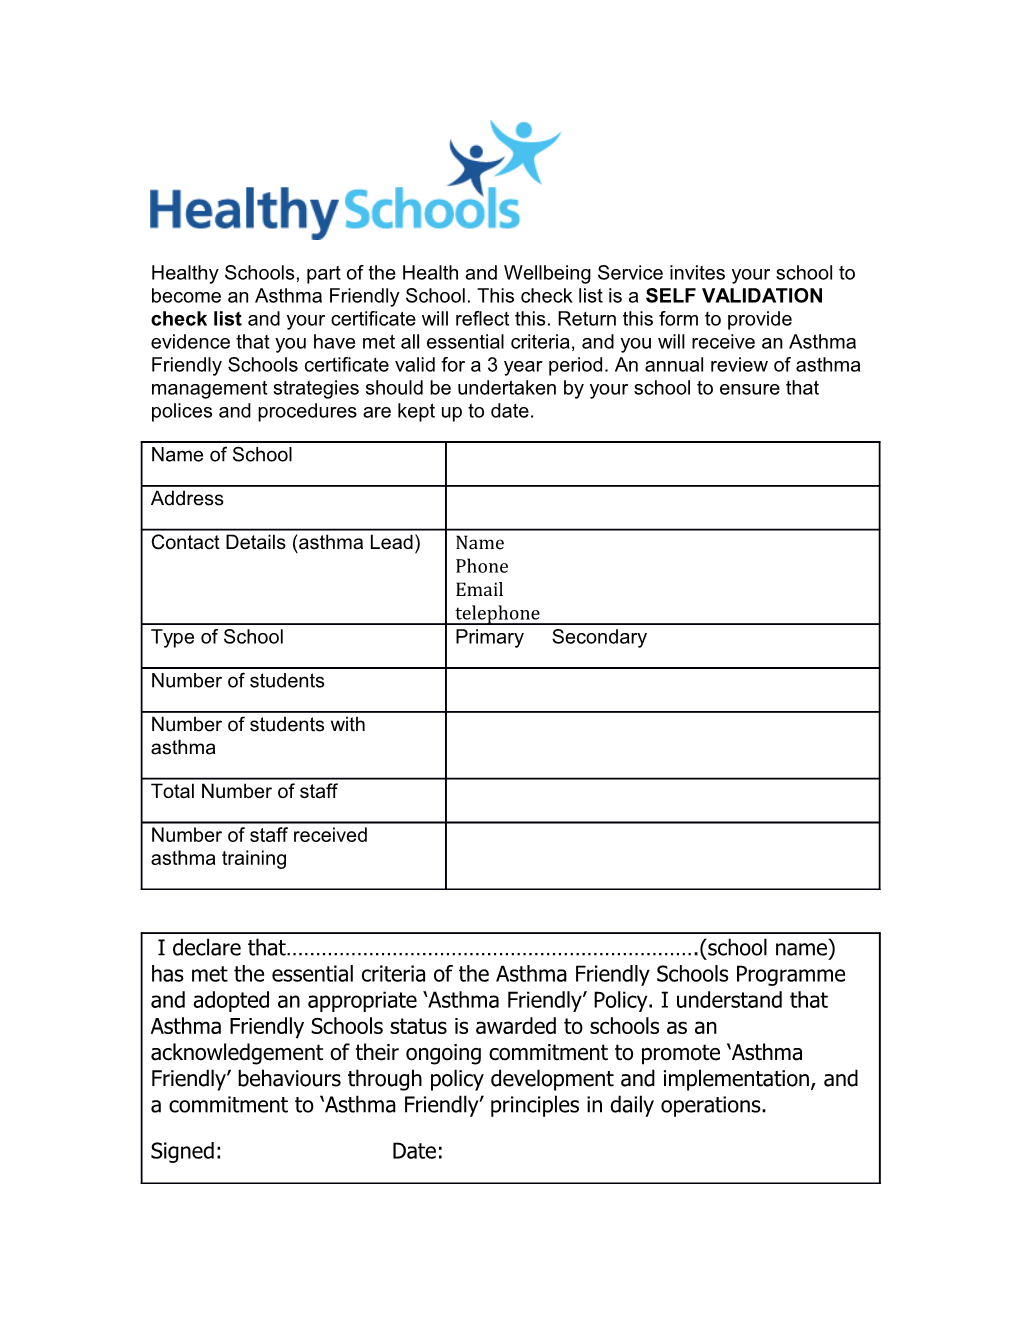 Healthy Schools, Part of the Health and Wellbeing Service Invites Your School to Become